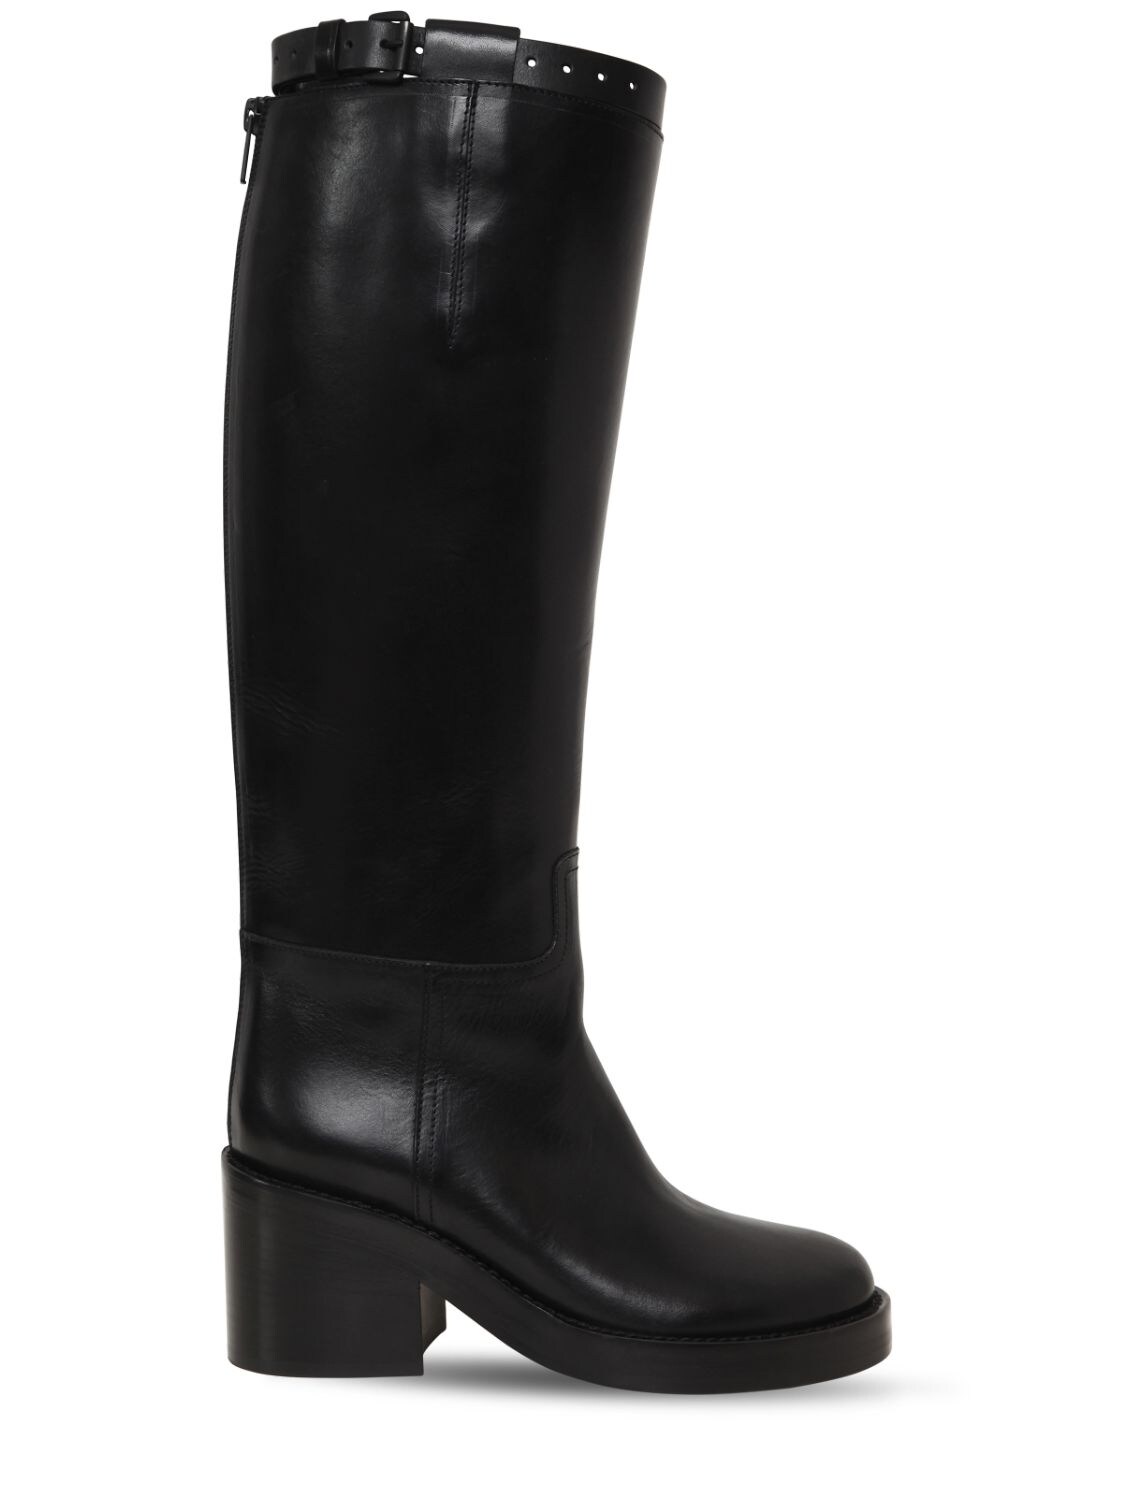 ANN DEMEULEMEESTER 75MM BRUSHED LEATHER RIDING BOOTS,70I51K004-MDK50